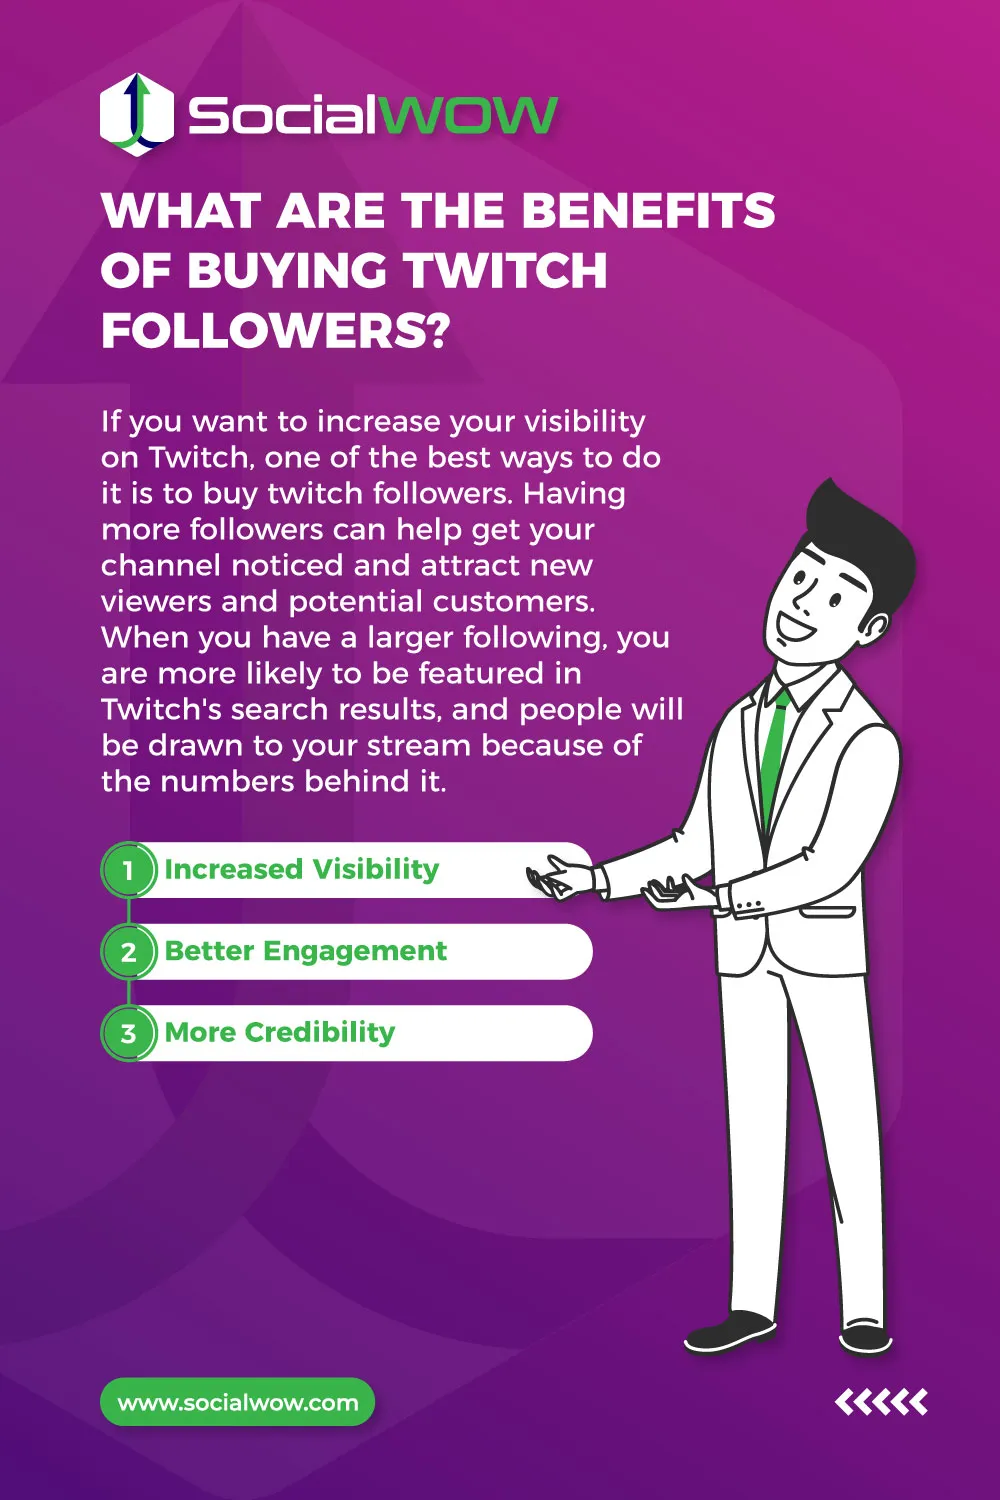 Benefits of buying twitch followers